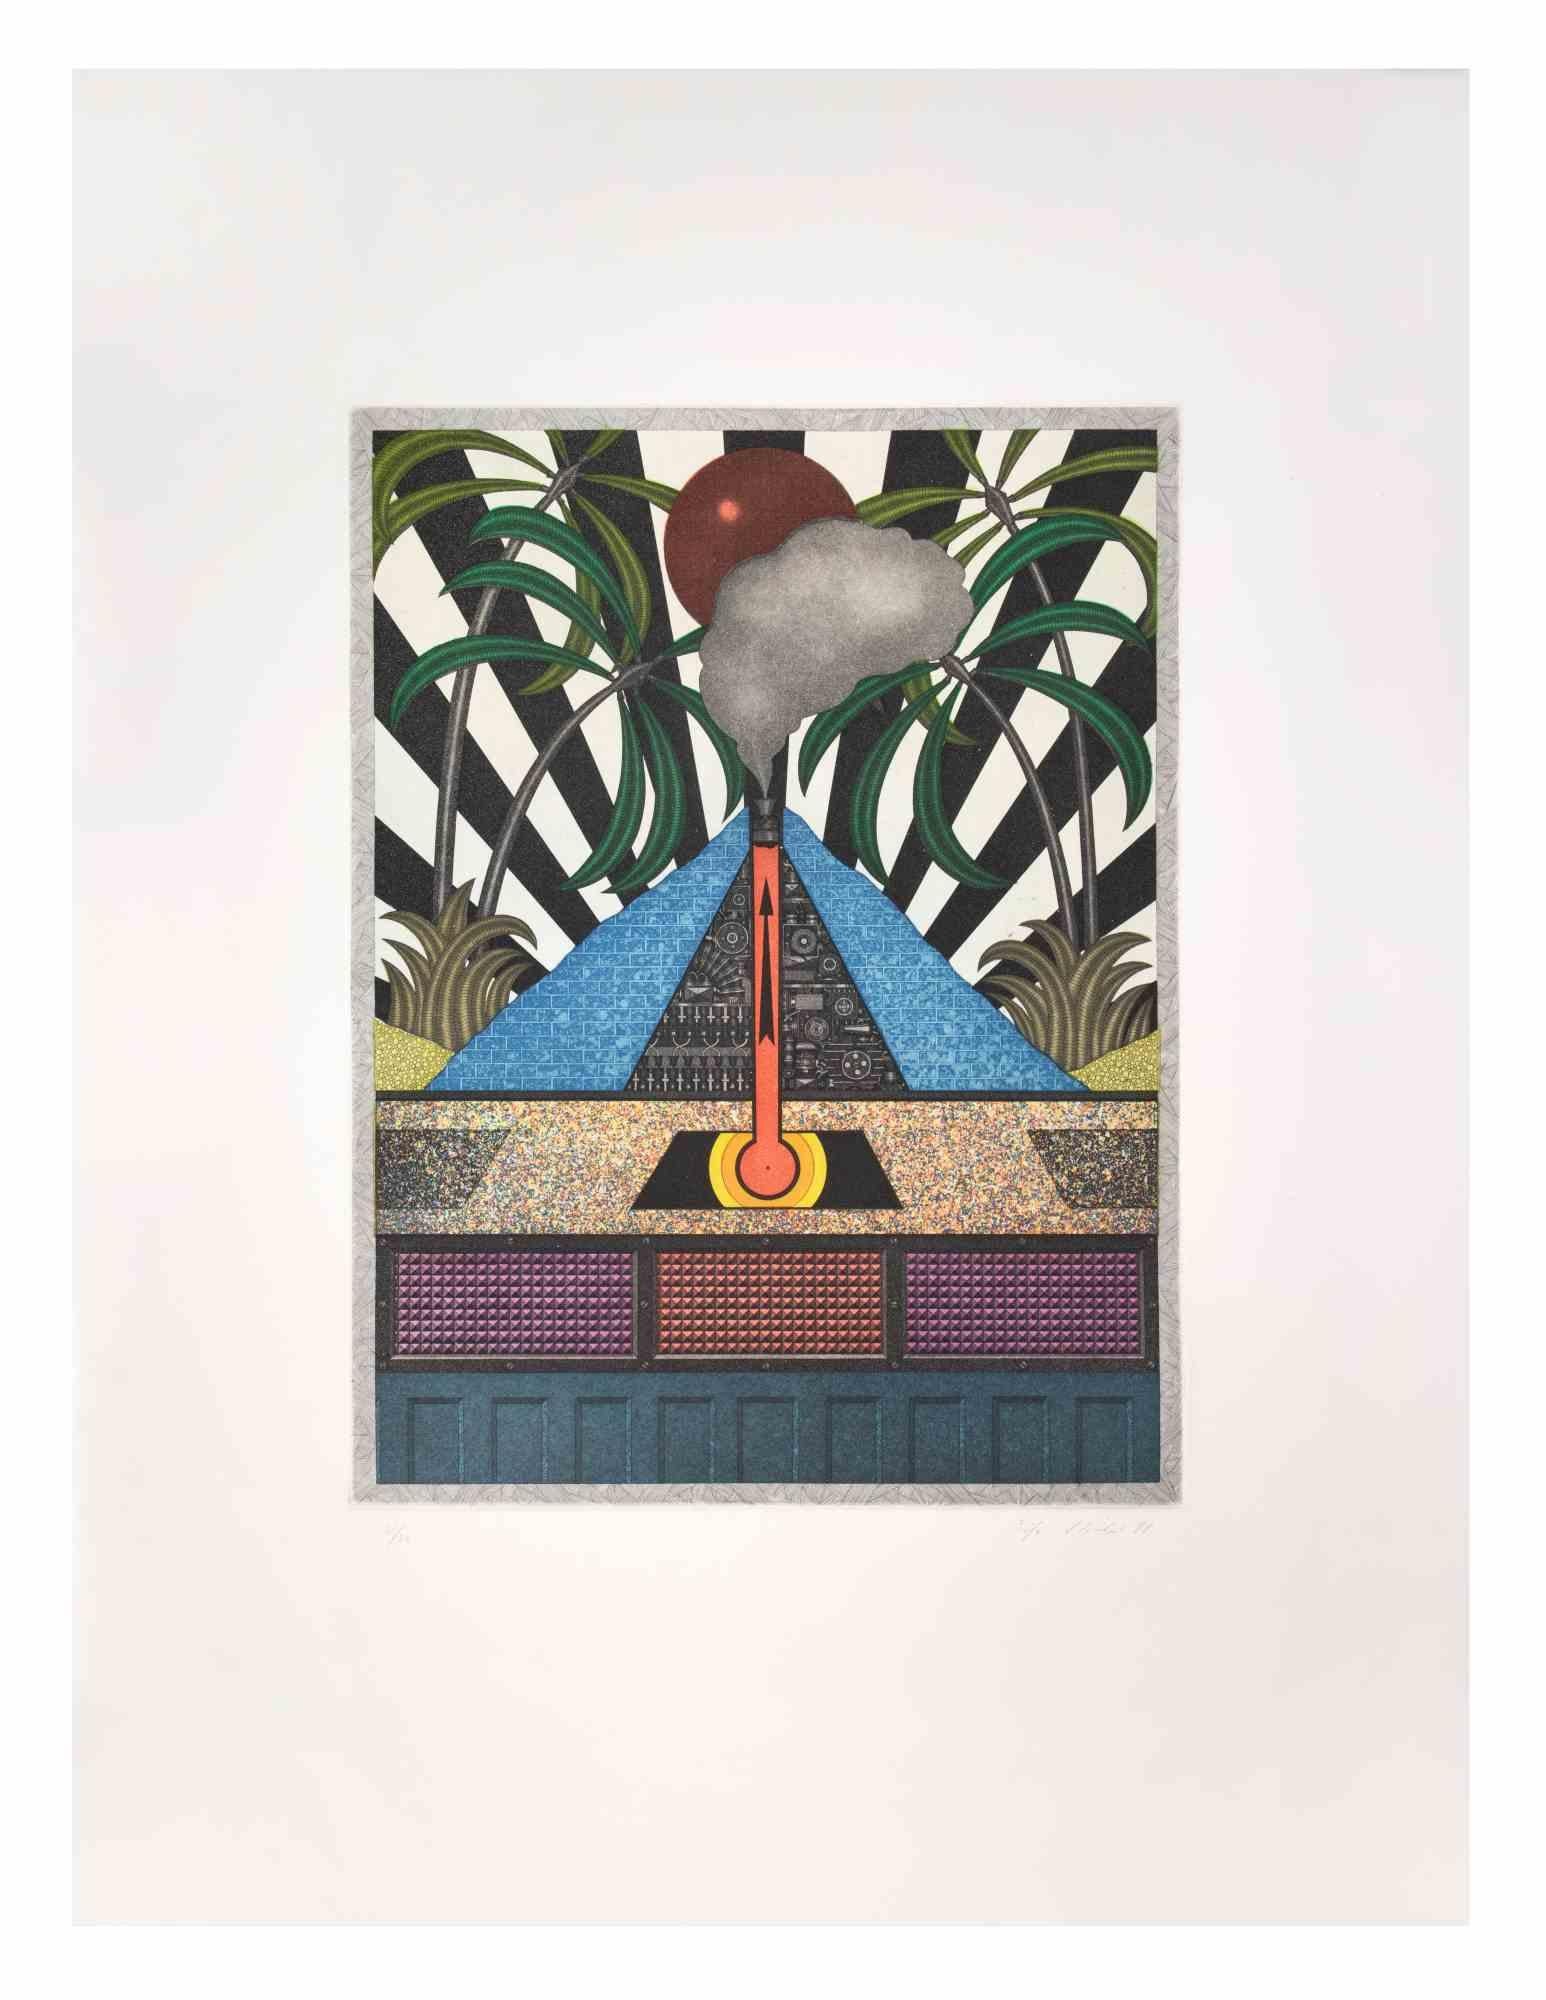 Blue Volcan is a contemporary artwork realized by the artist Fifo Stricker in 1984.

Mixed colored aquatint and etching. Original title: Der Blaue Vulcan

Hand signed and dated by the artist on the lower right margin.

Numbered on the lower left